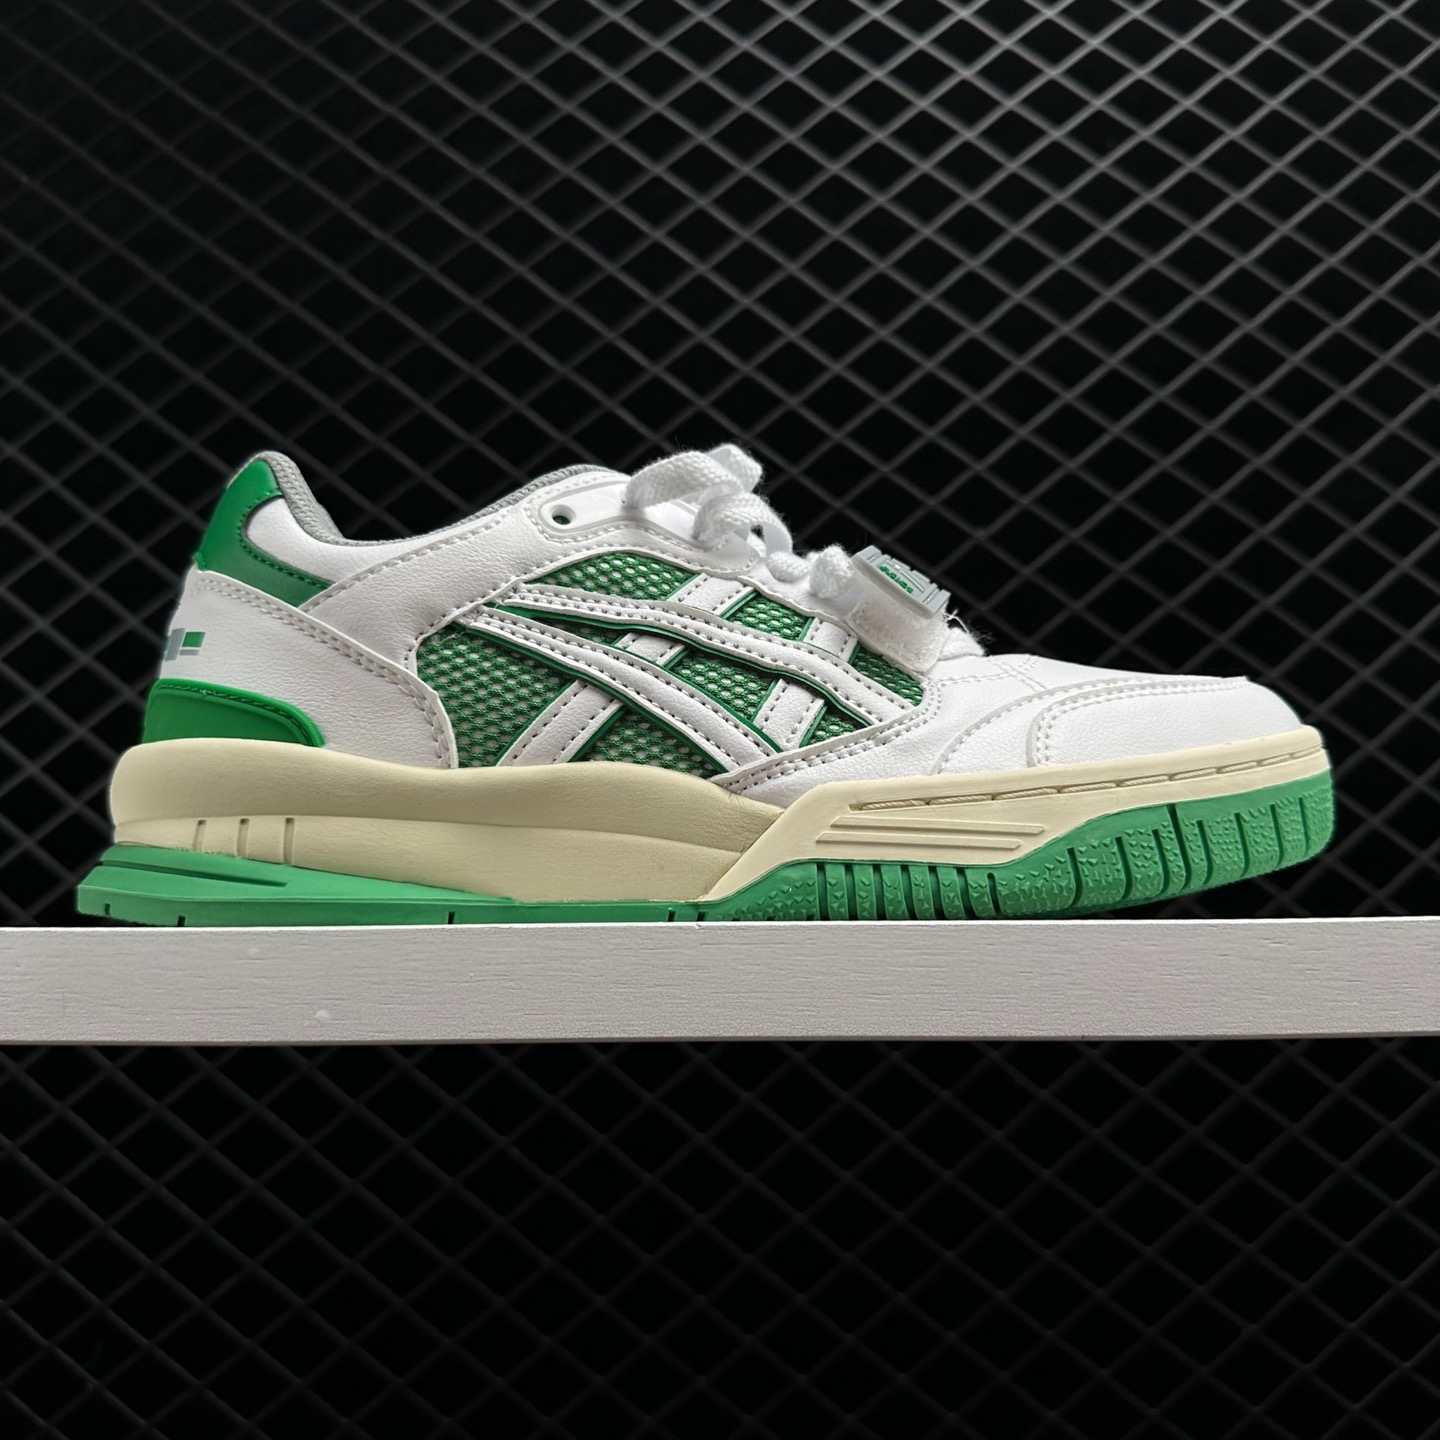 Asics Gel-Spotlyte Low V2 White Green 1203A258-101 - Shop Now for Stylish Sneakers!